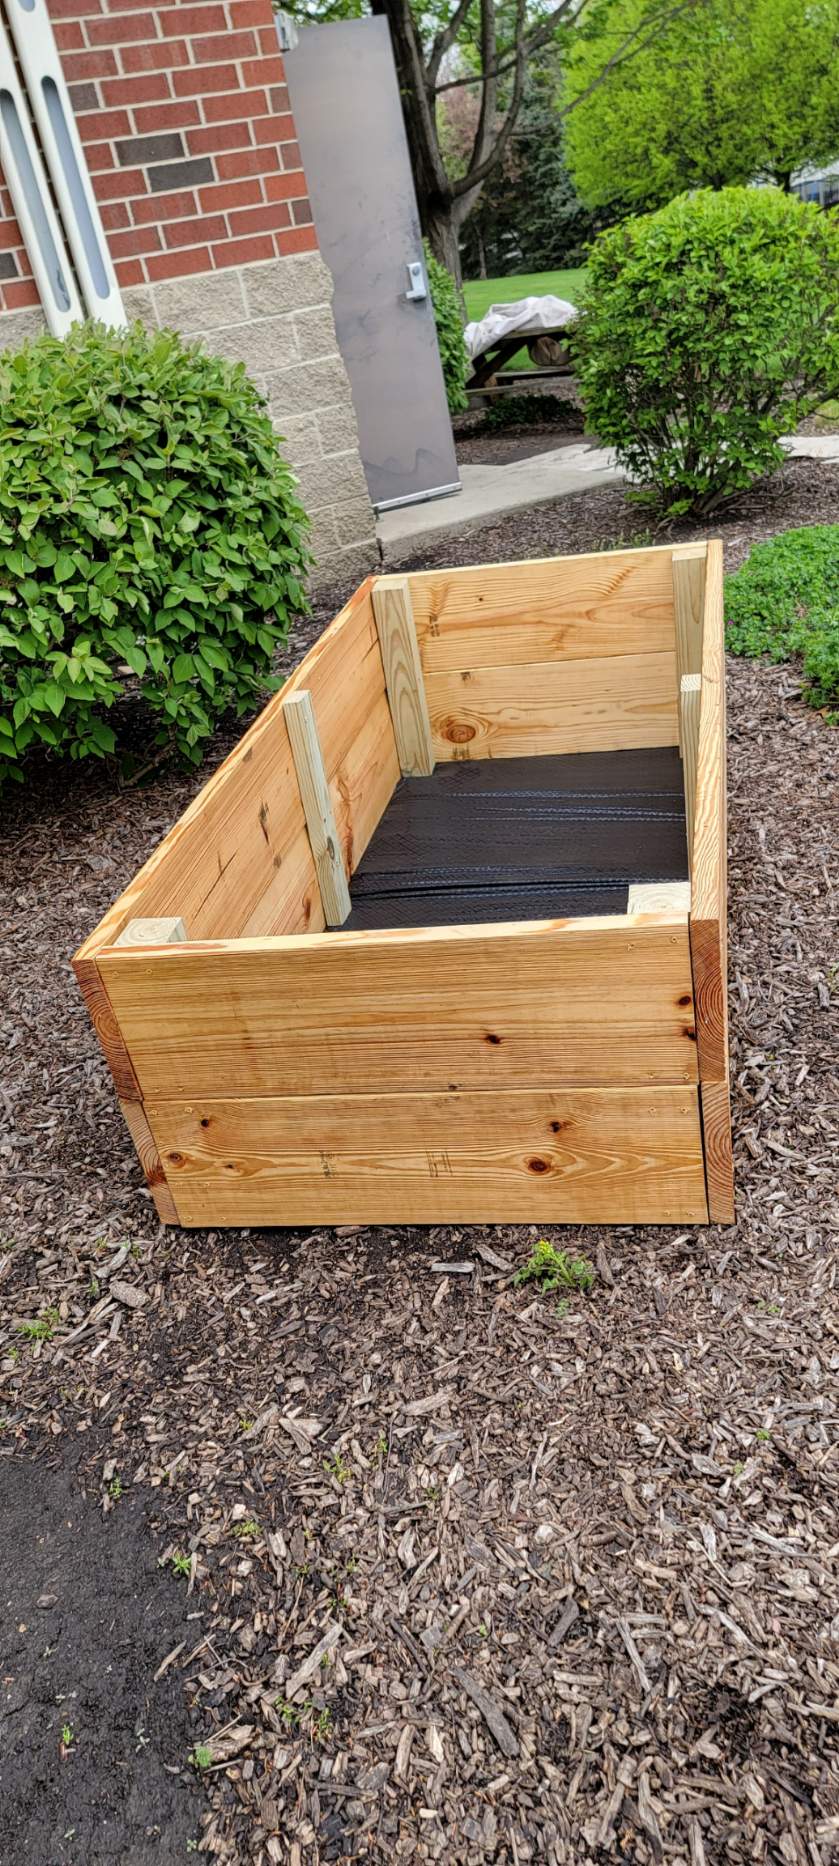 close up image of garden bed made out of plywood